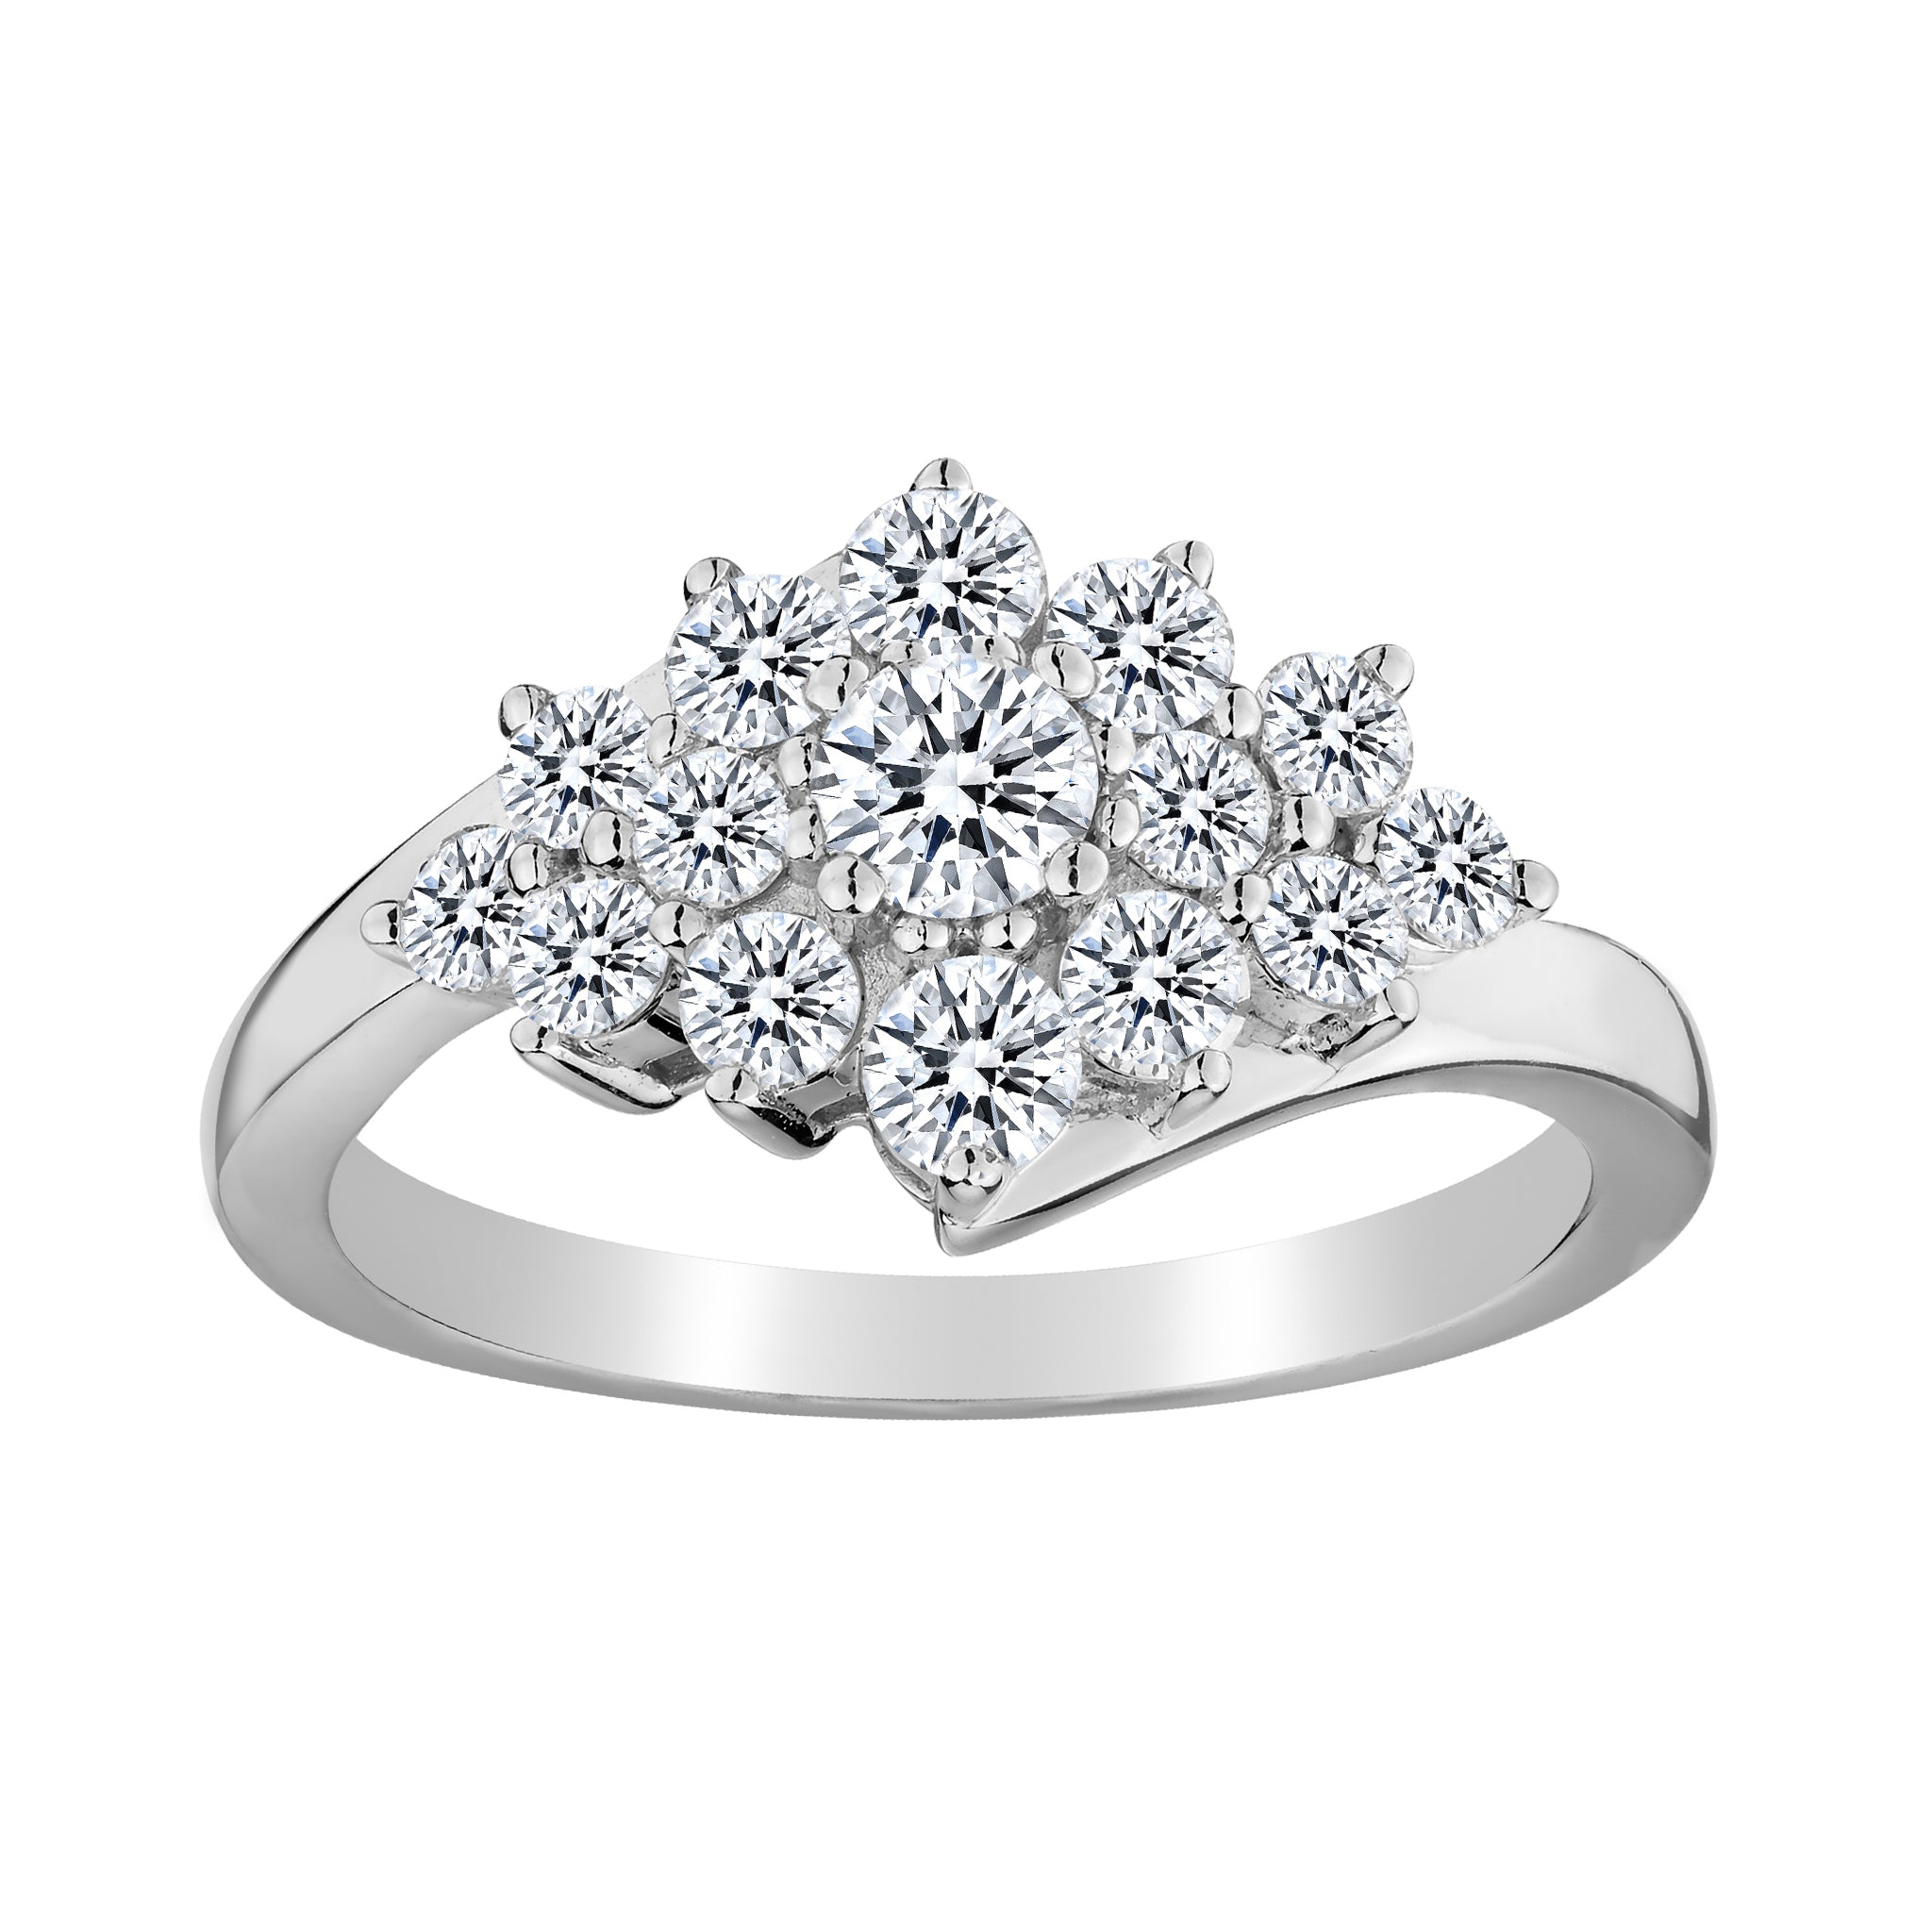 1.00 CARAT DIAMOND RING, 10kt WHITE GOLD...................NOW - Griffin Jewellery Designs